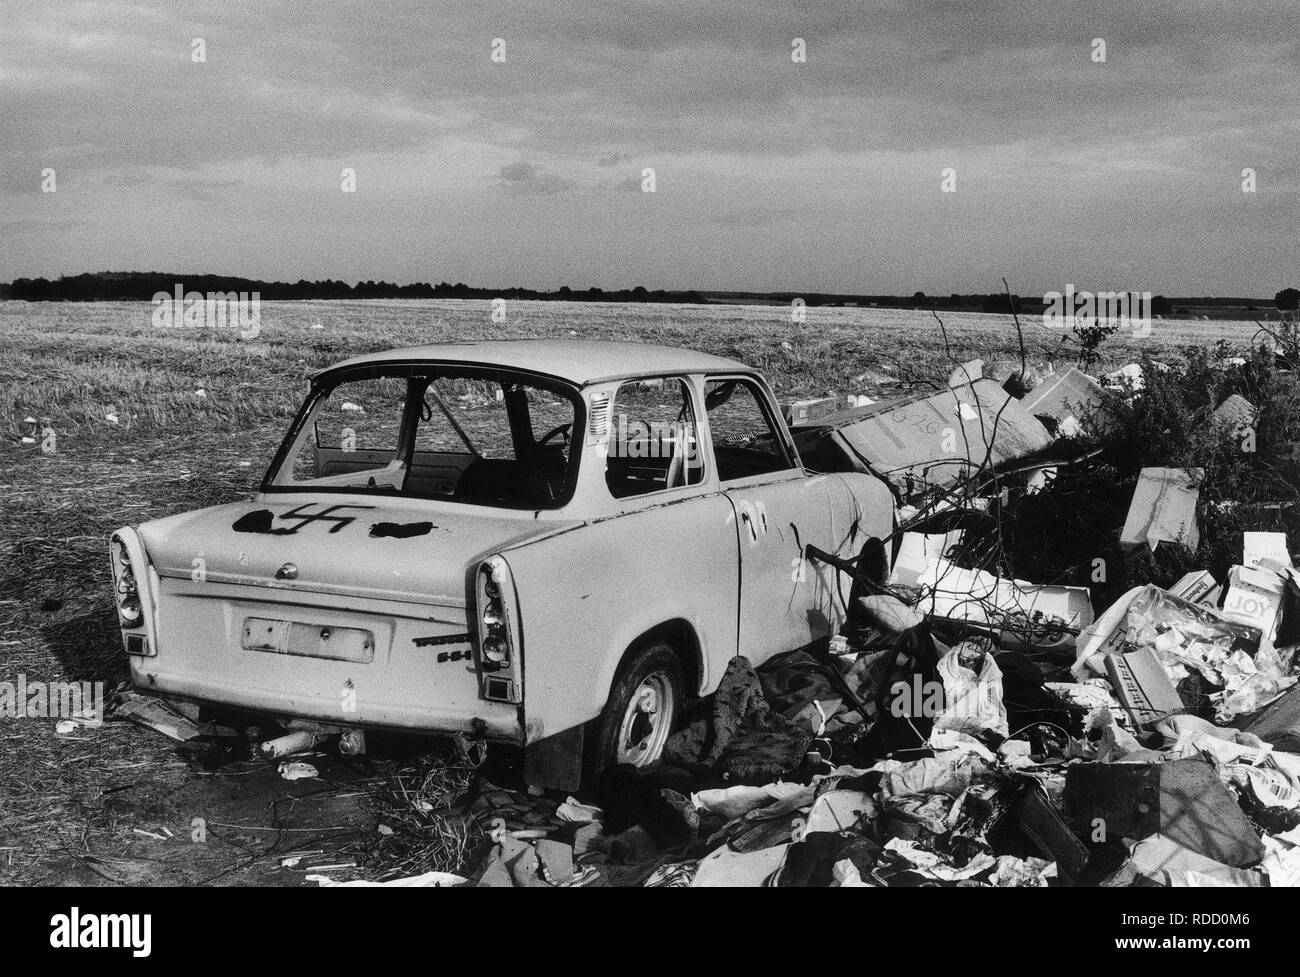 GERMANY in 1990 after reunification, former East Germany, German Democratic Republic GDR, typical plastic car Trabant also called Trabbi with fascist Nazi symbol swastika Hakenkreuz on wild dumping site in village Plauerhagen, Mecklenburg, people have dumped their East German car in exchange to new western cars, scan from black and white negative with film grain Stock Photo